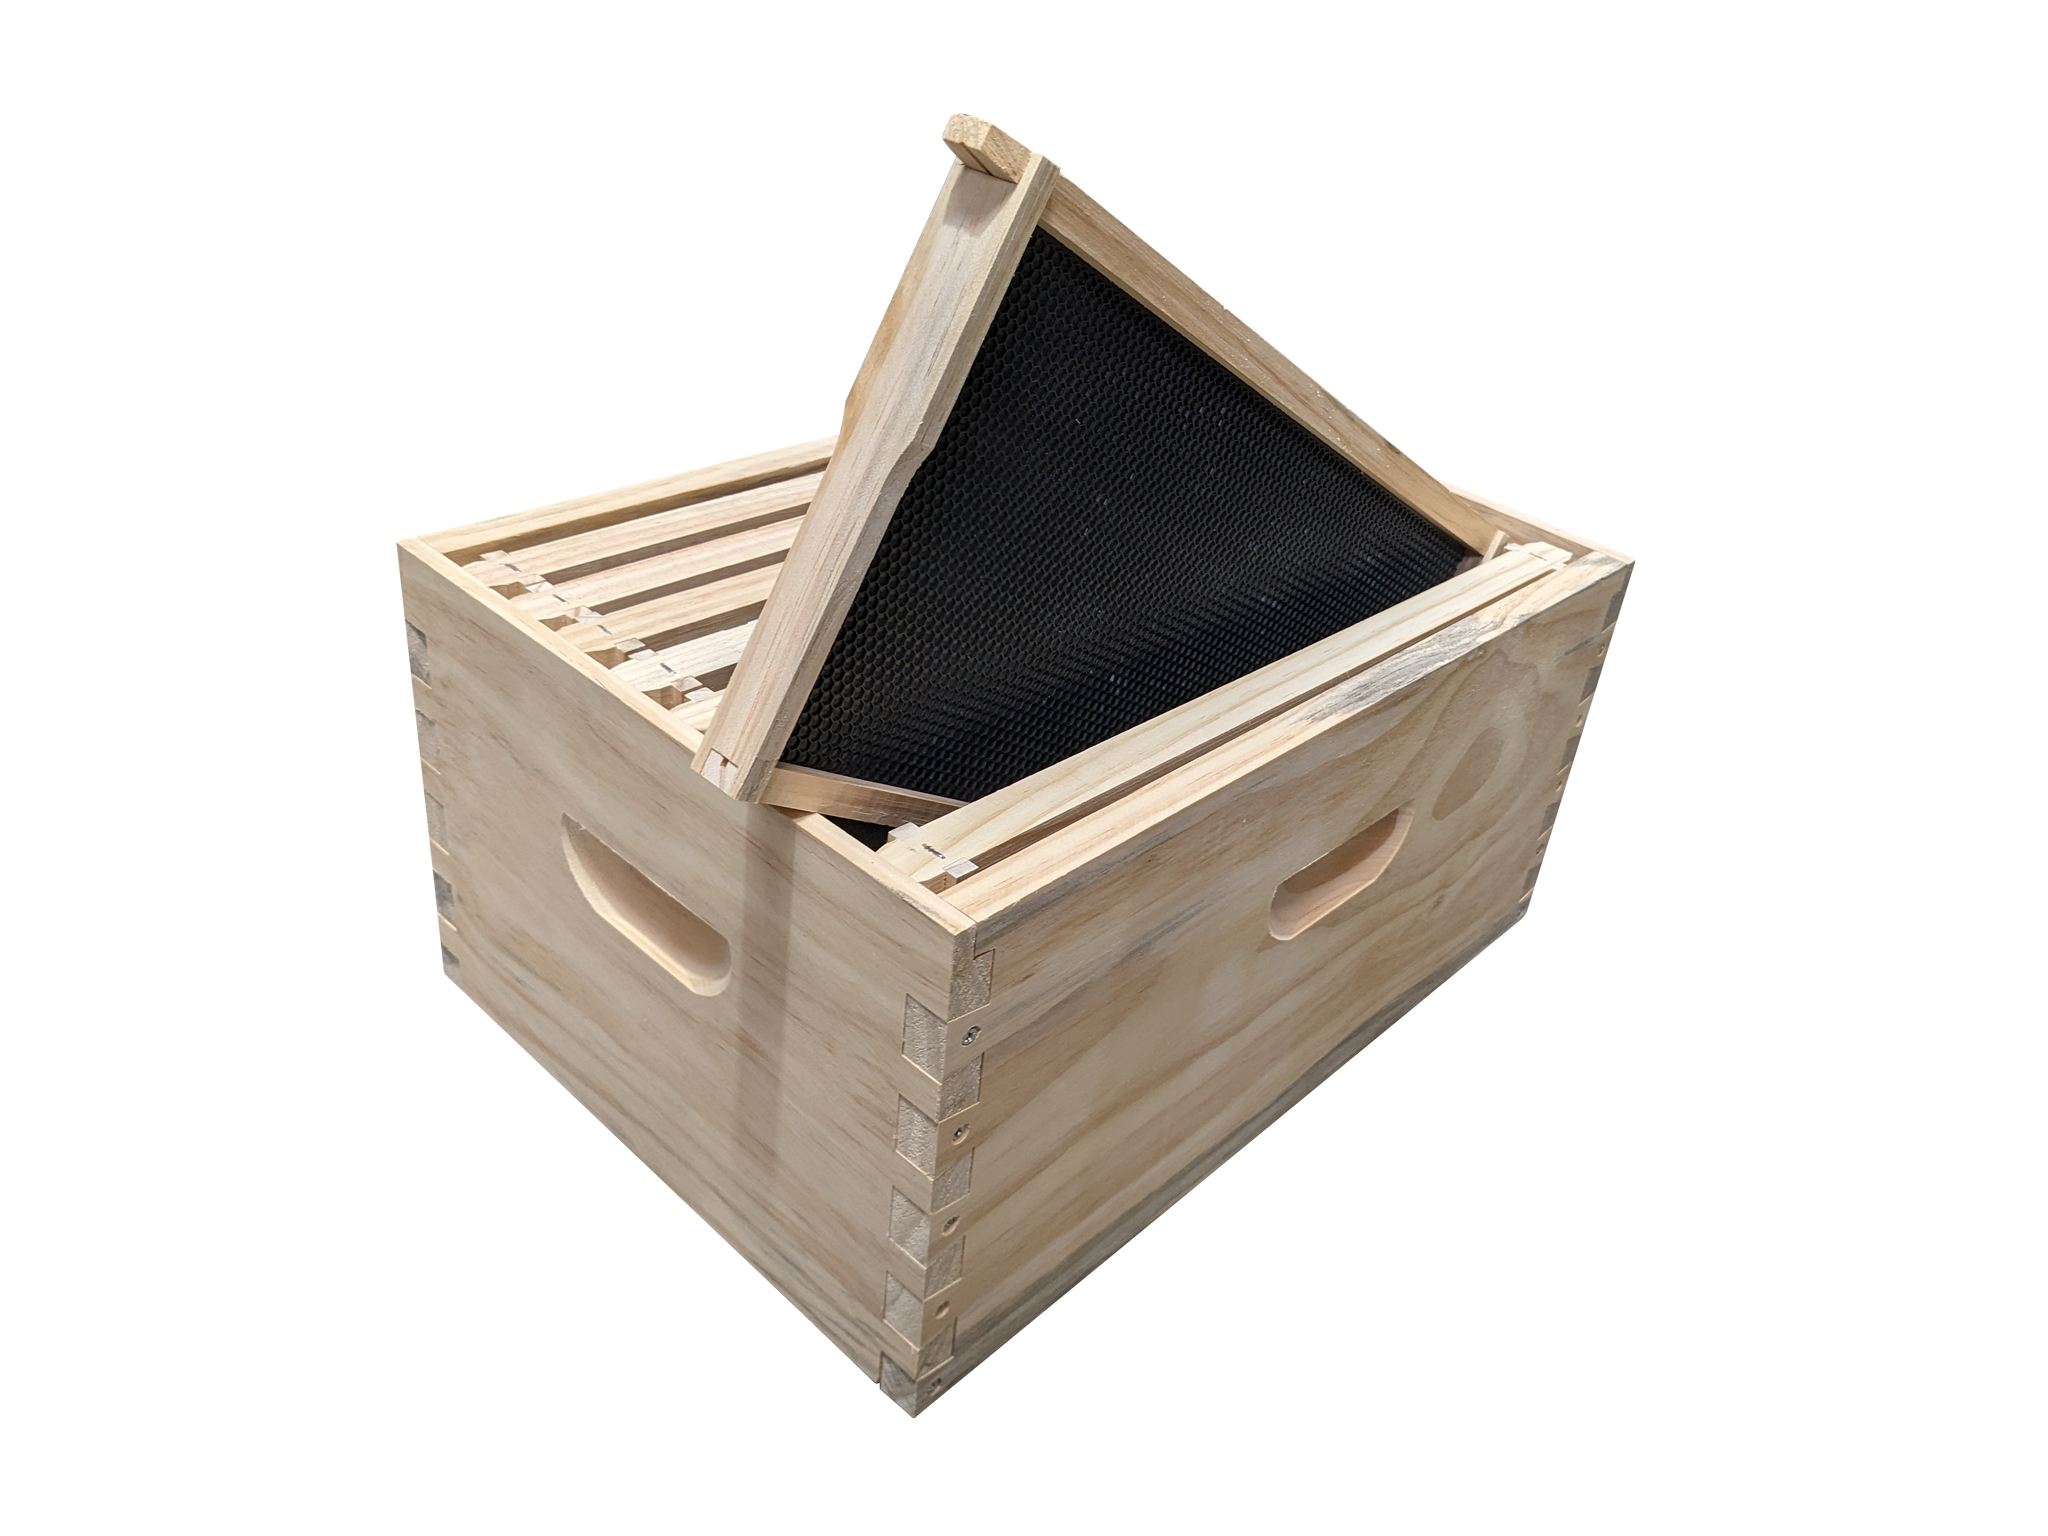 Assembled beehive box with assembled frames and black plastic foundation